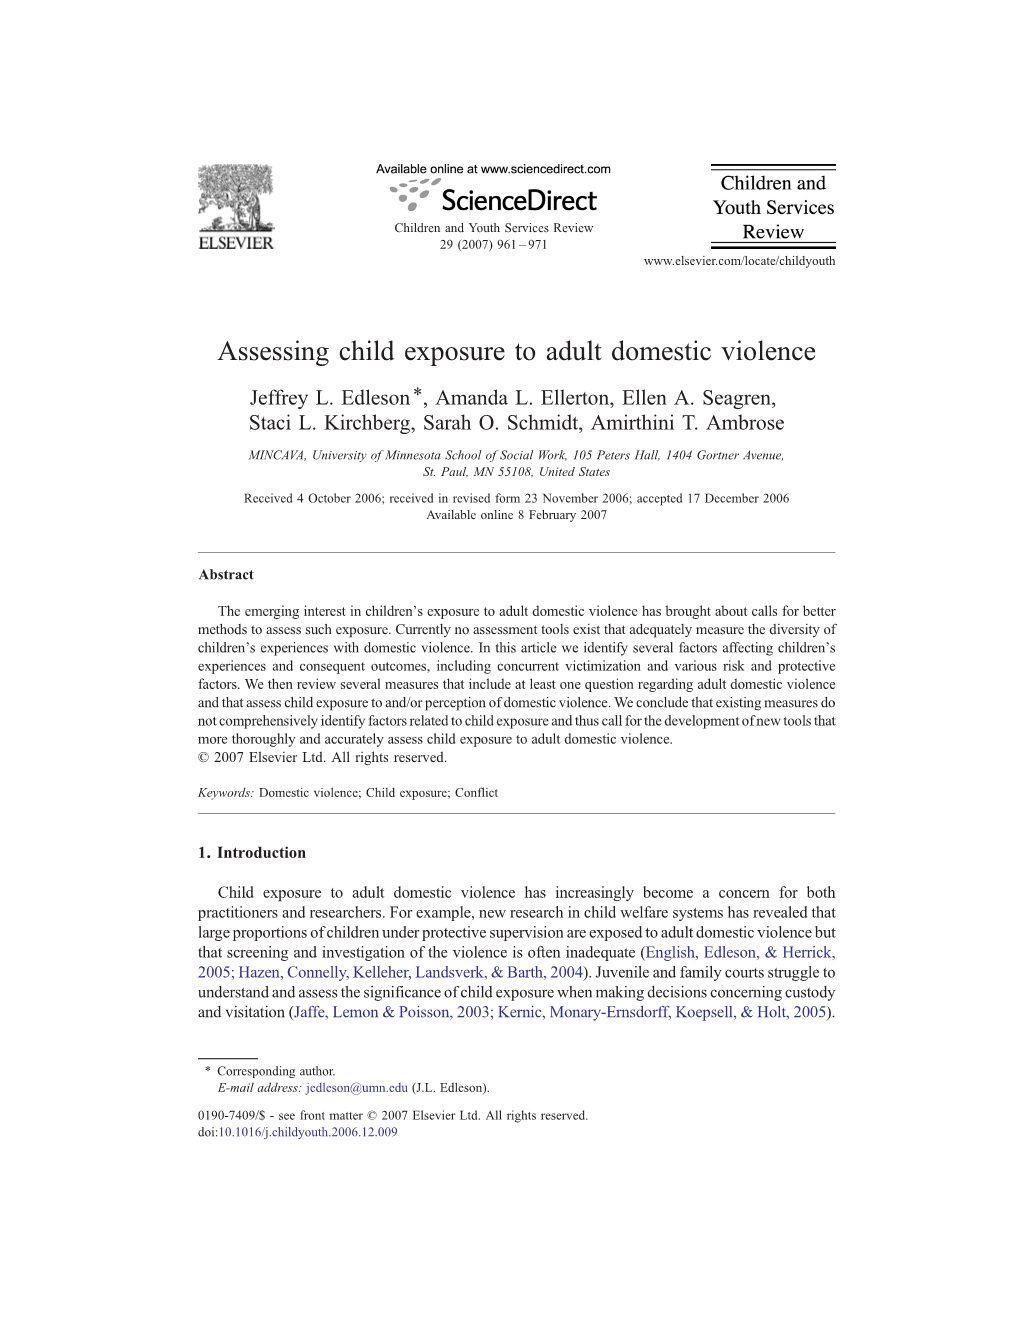 Assessing Childhood Exposure to Adult Domestic Violence